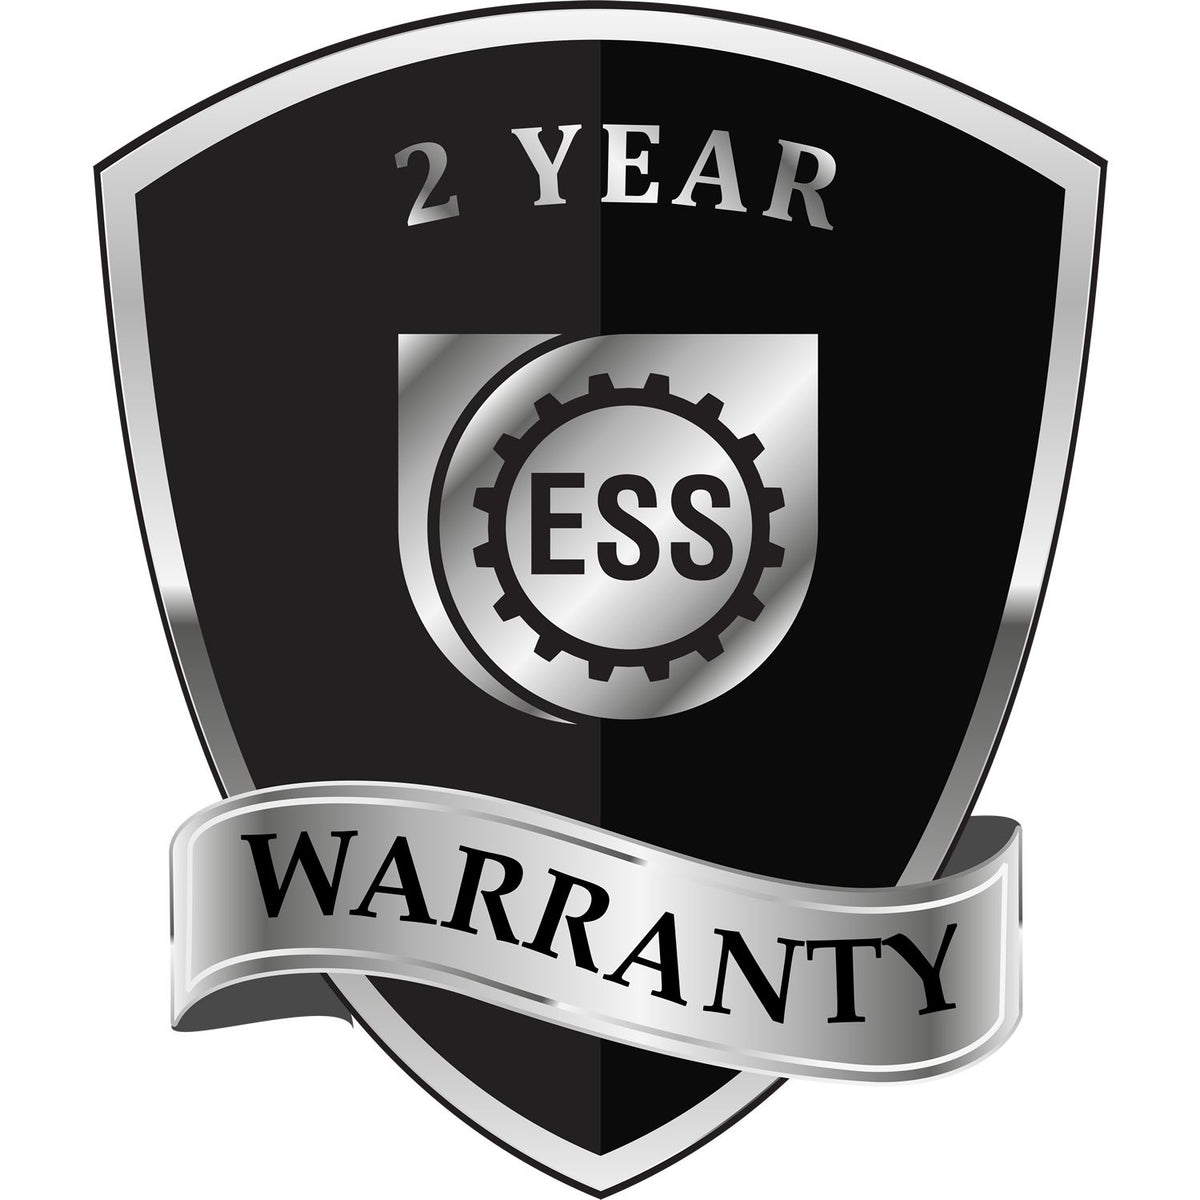 A black and silver badge or emblem showing warranty information for the Gift New Hampshire Engineer Seal